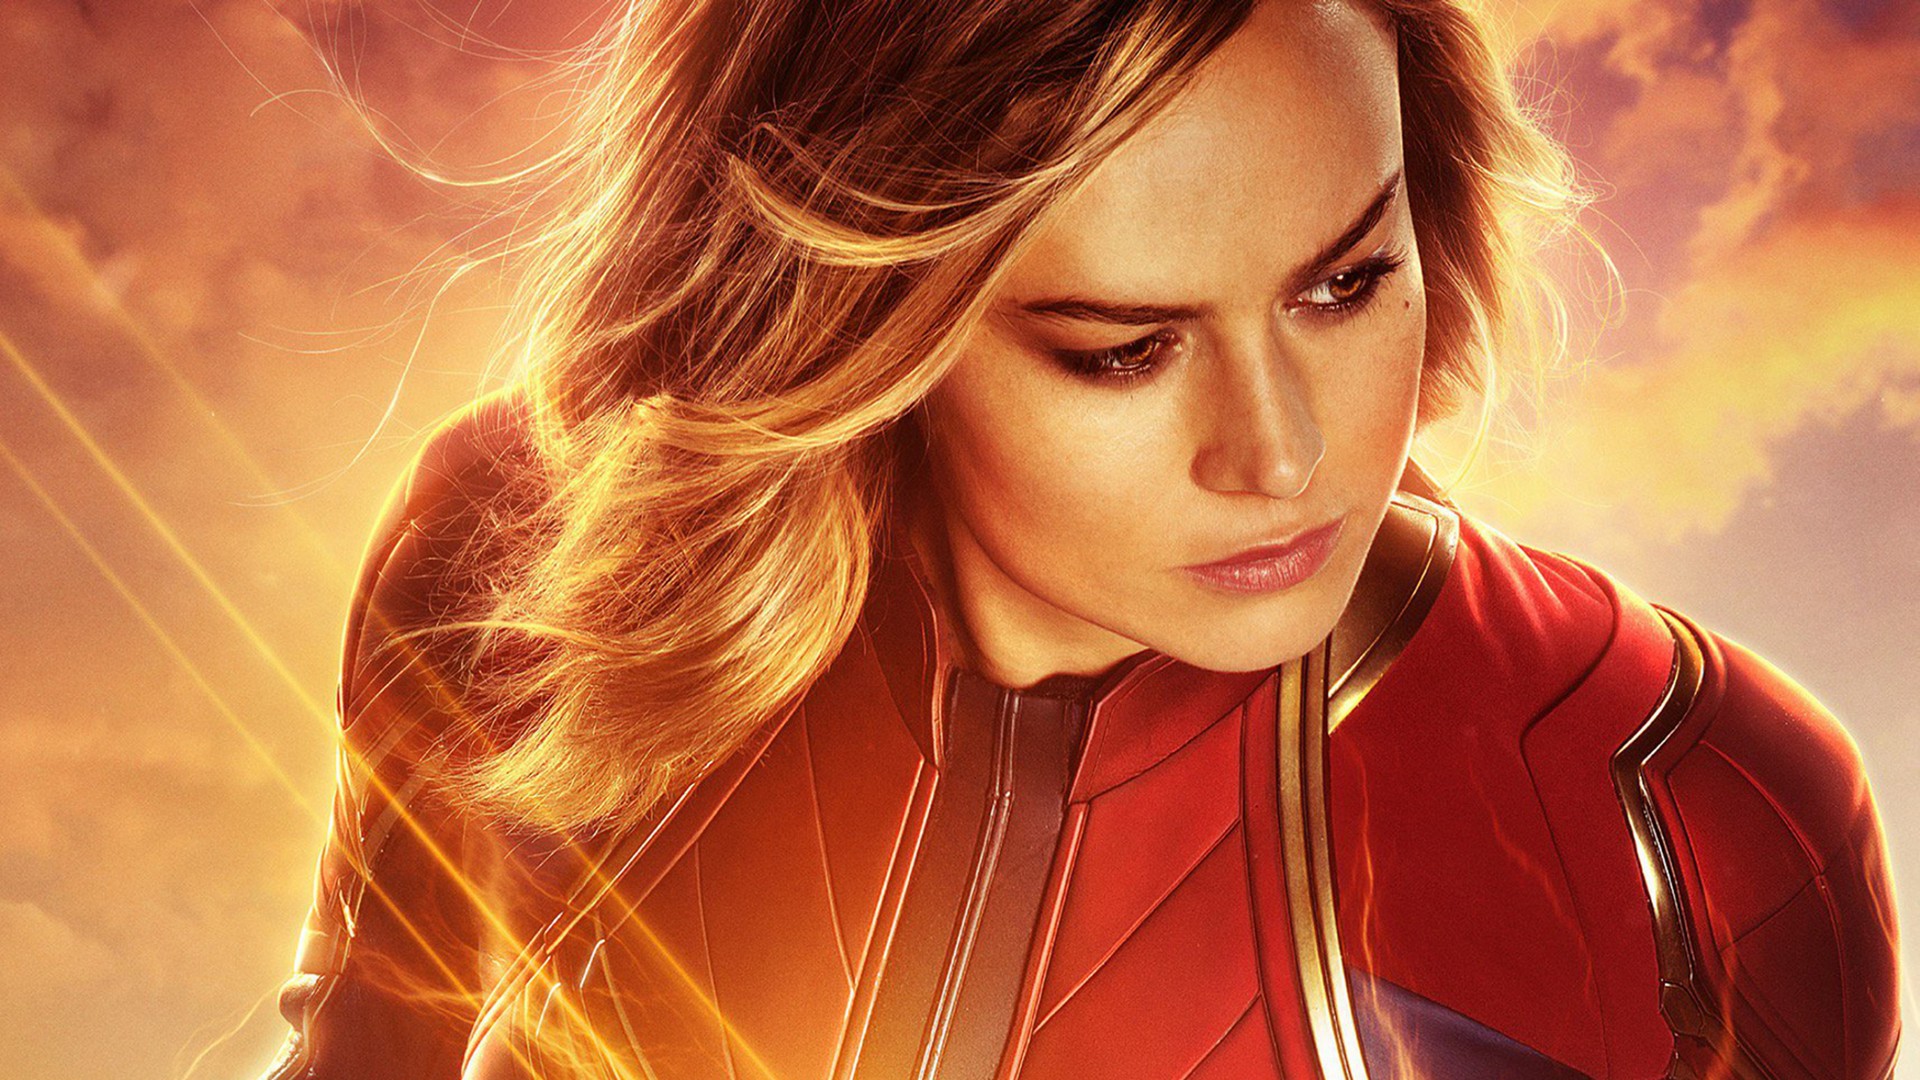 Captain Marvel 2019 Official Poster Wallpapers